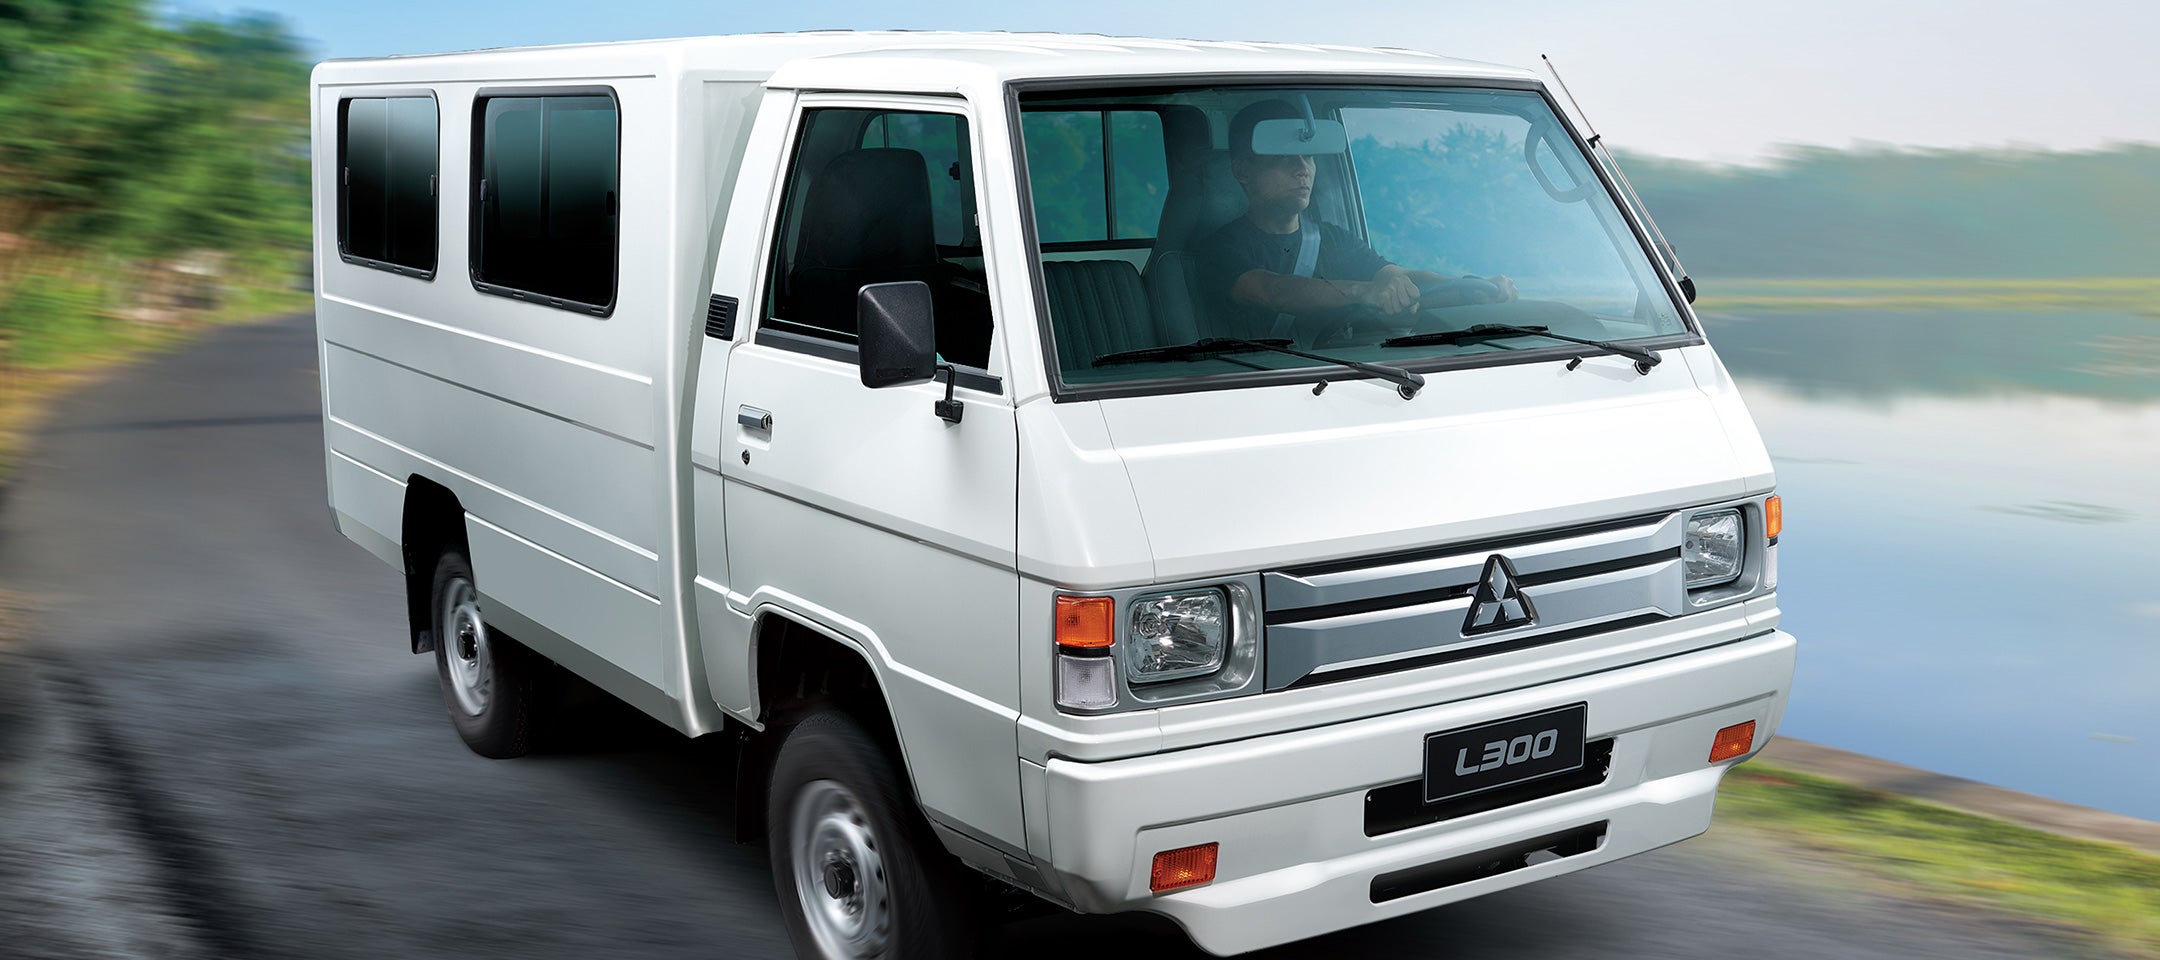 L300  Your reliable business partner  Mitsubishi Motors Philippines